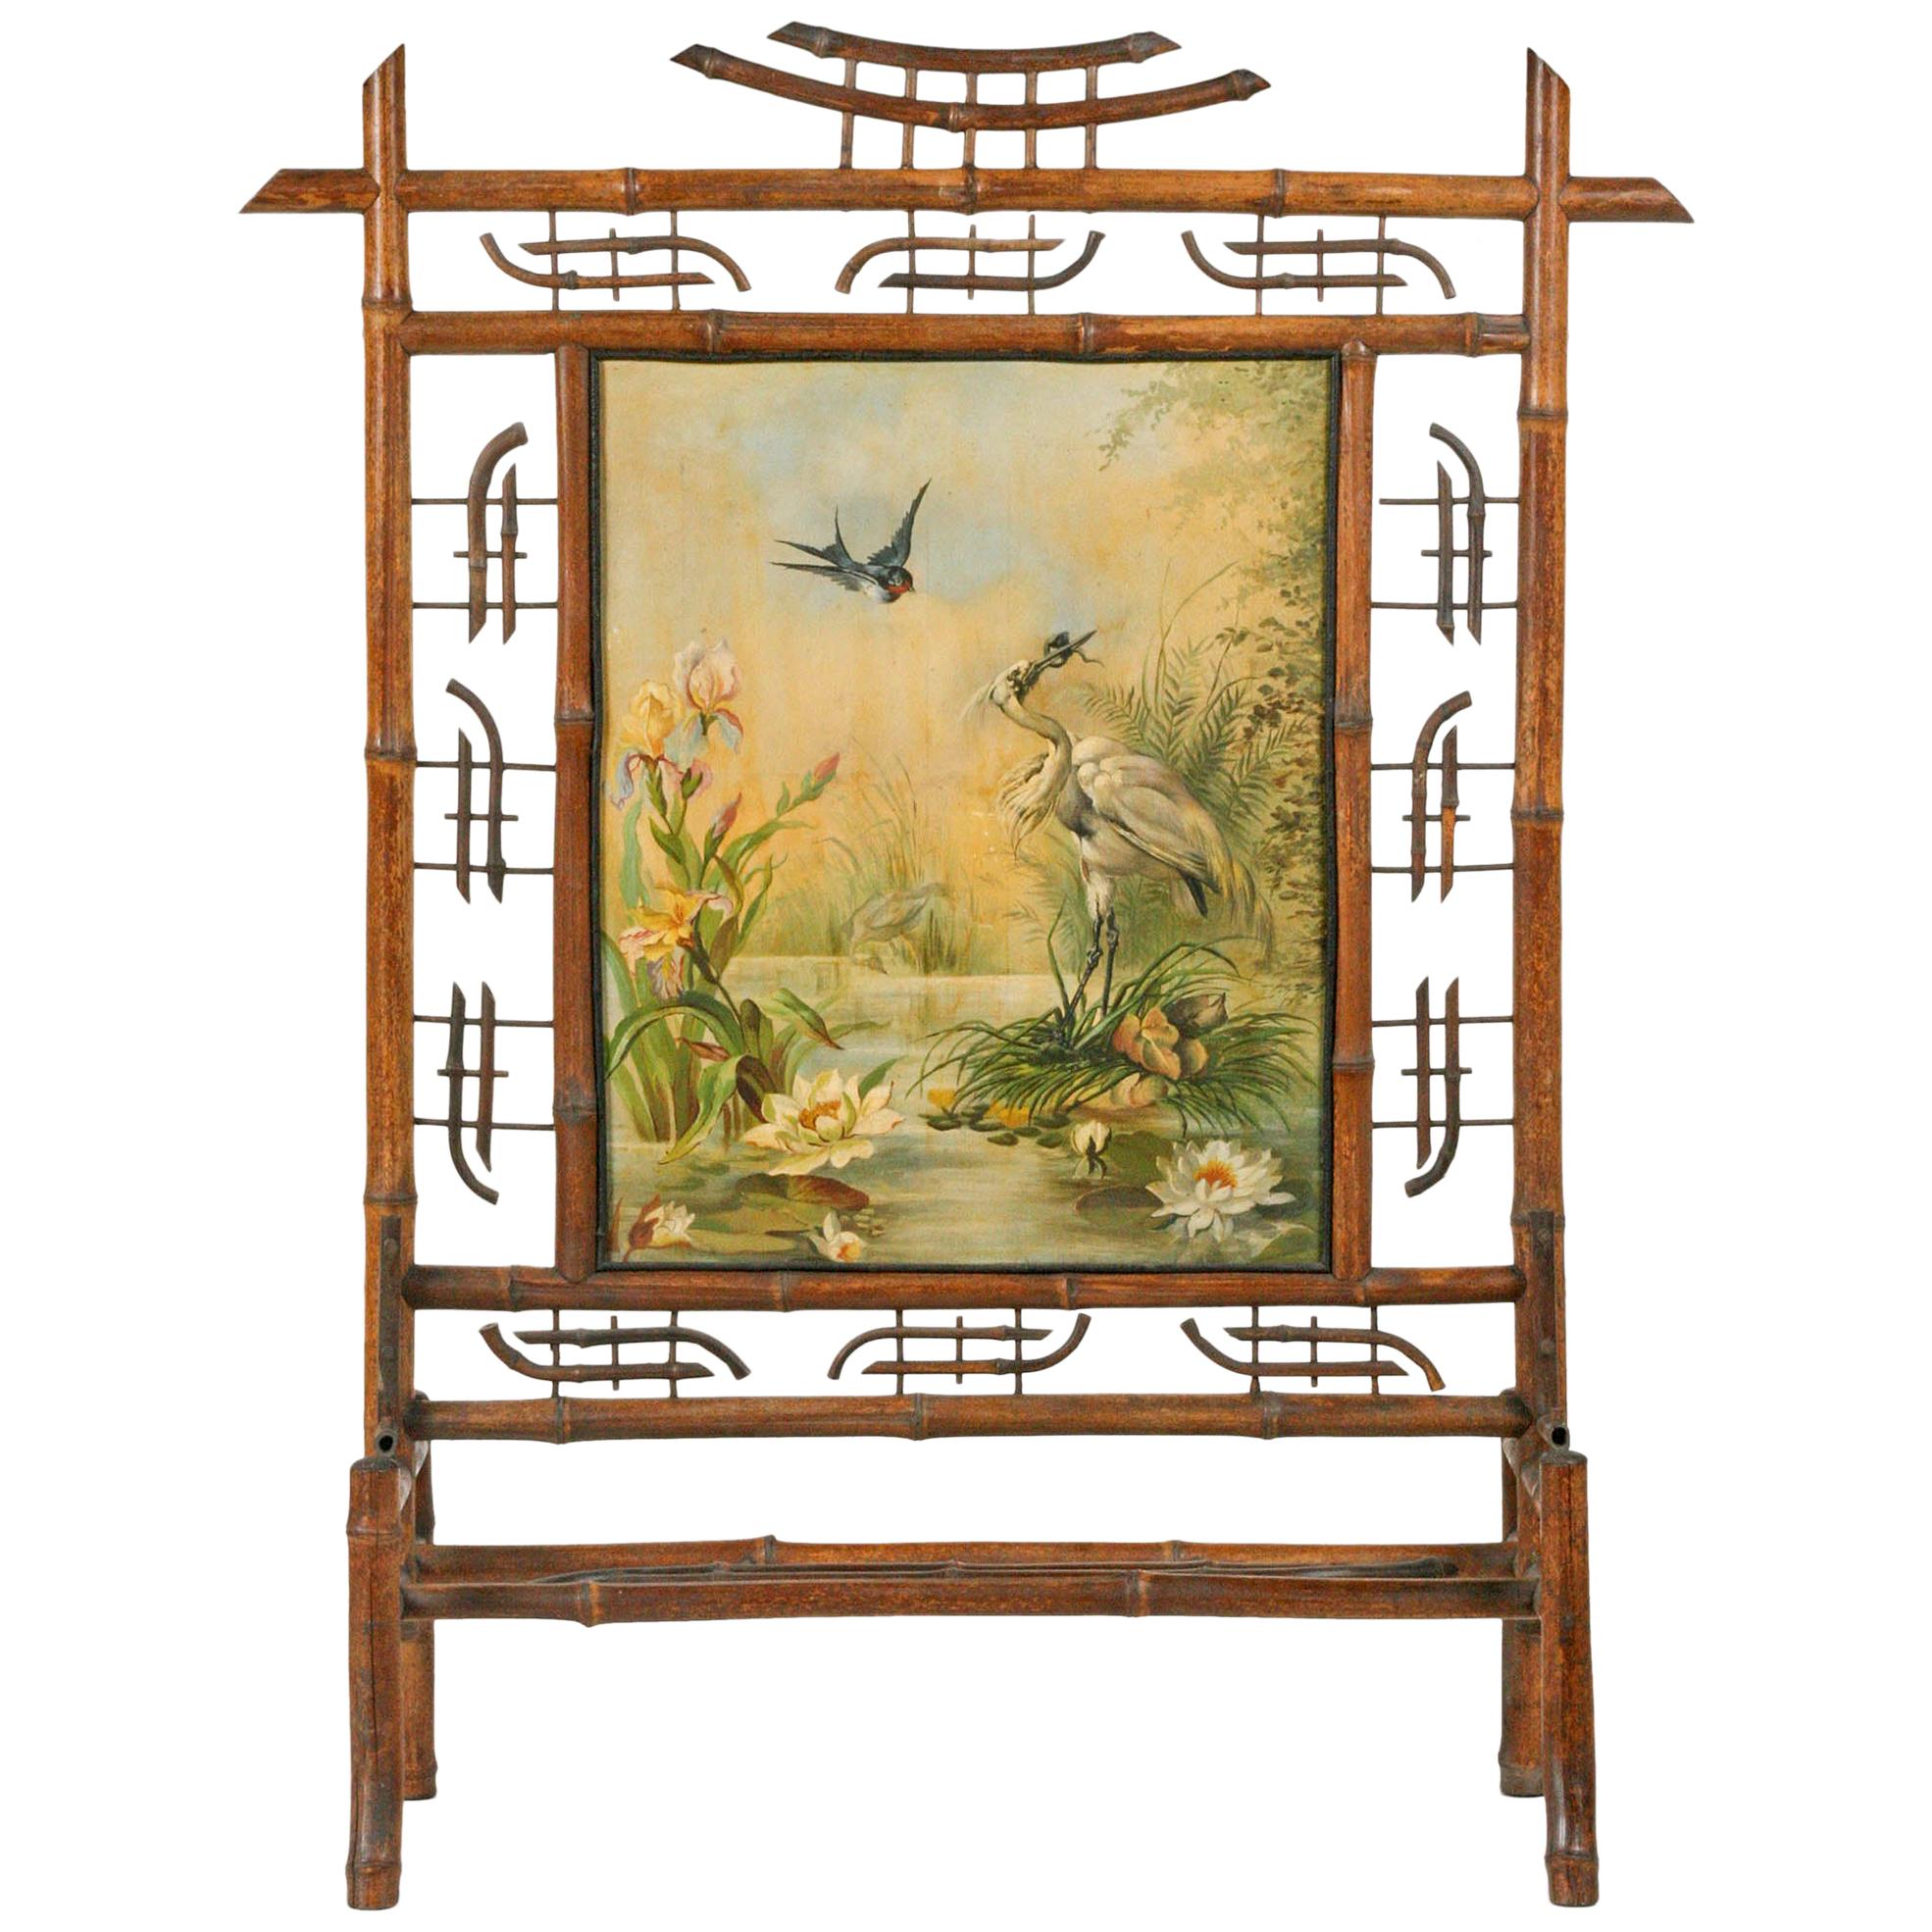 Art Nouveau Fireplace Screen, Made of Bamboo, with Painting on Canvas from 1896 For Sale